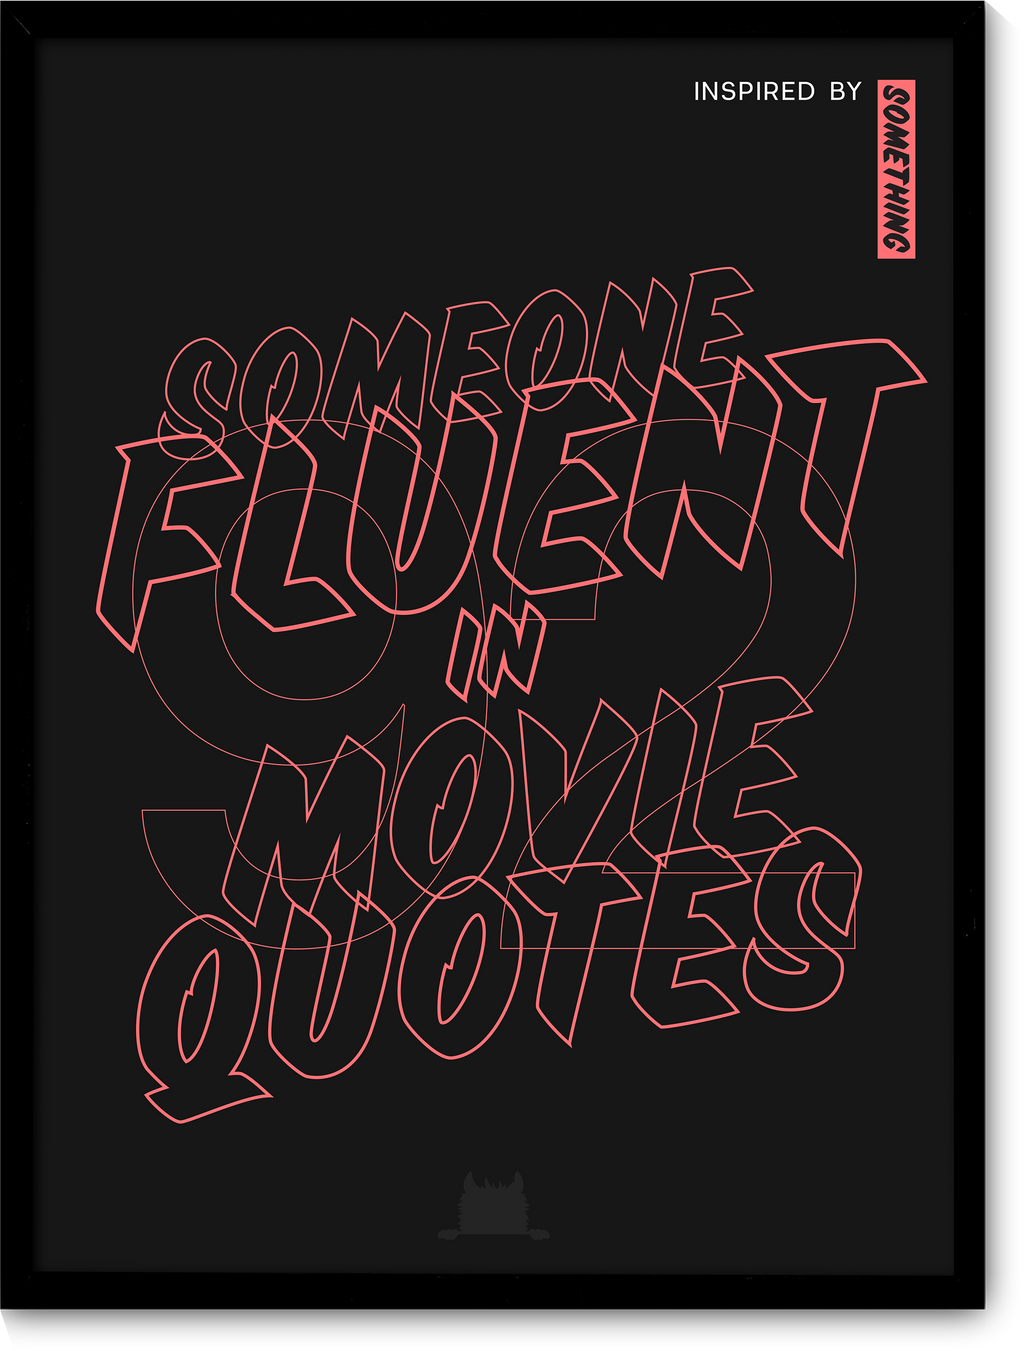 #92 Inspired by someone fluent in movie quotes.